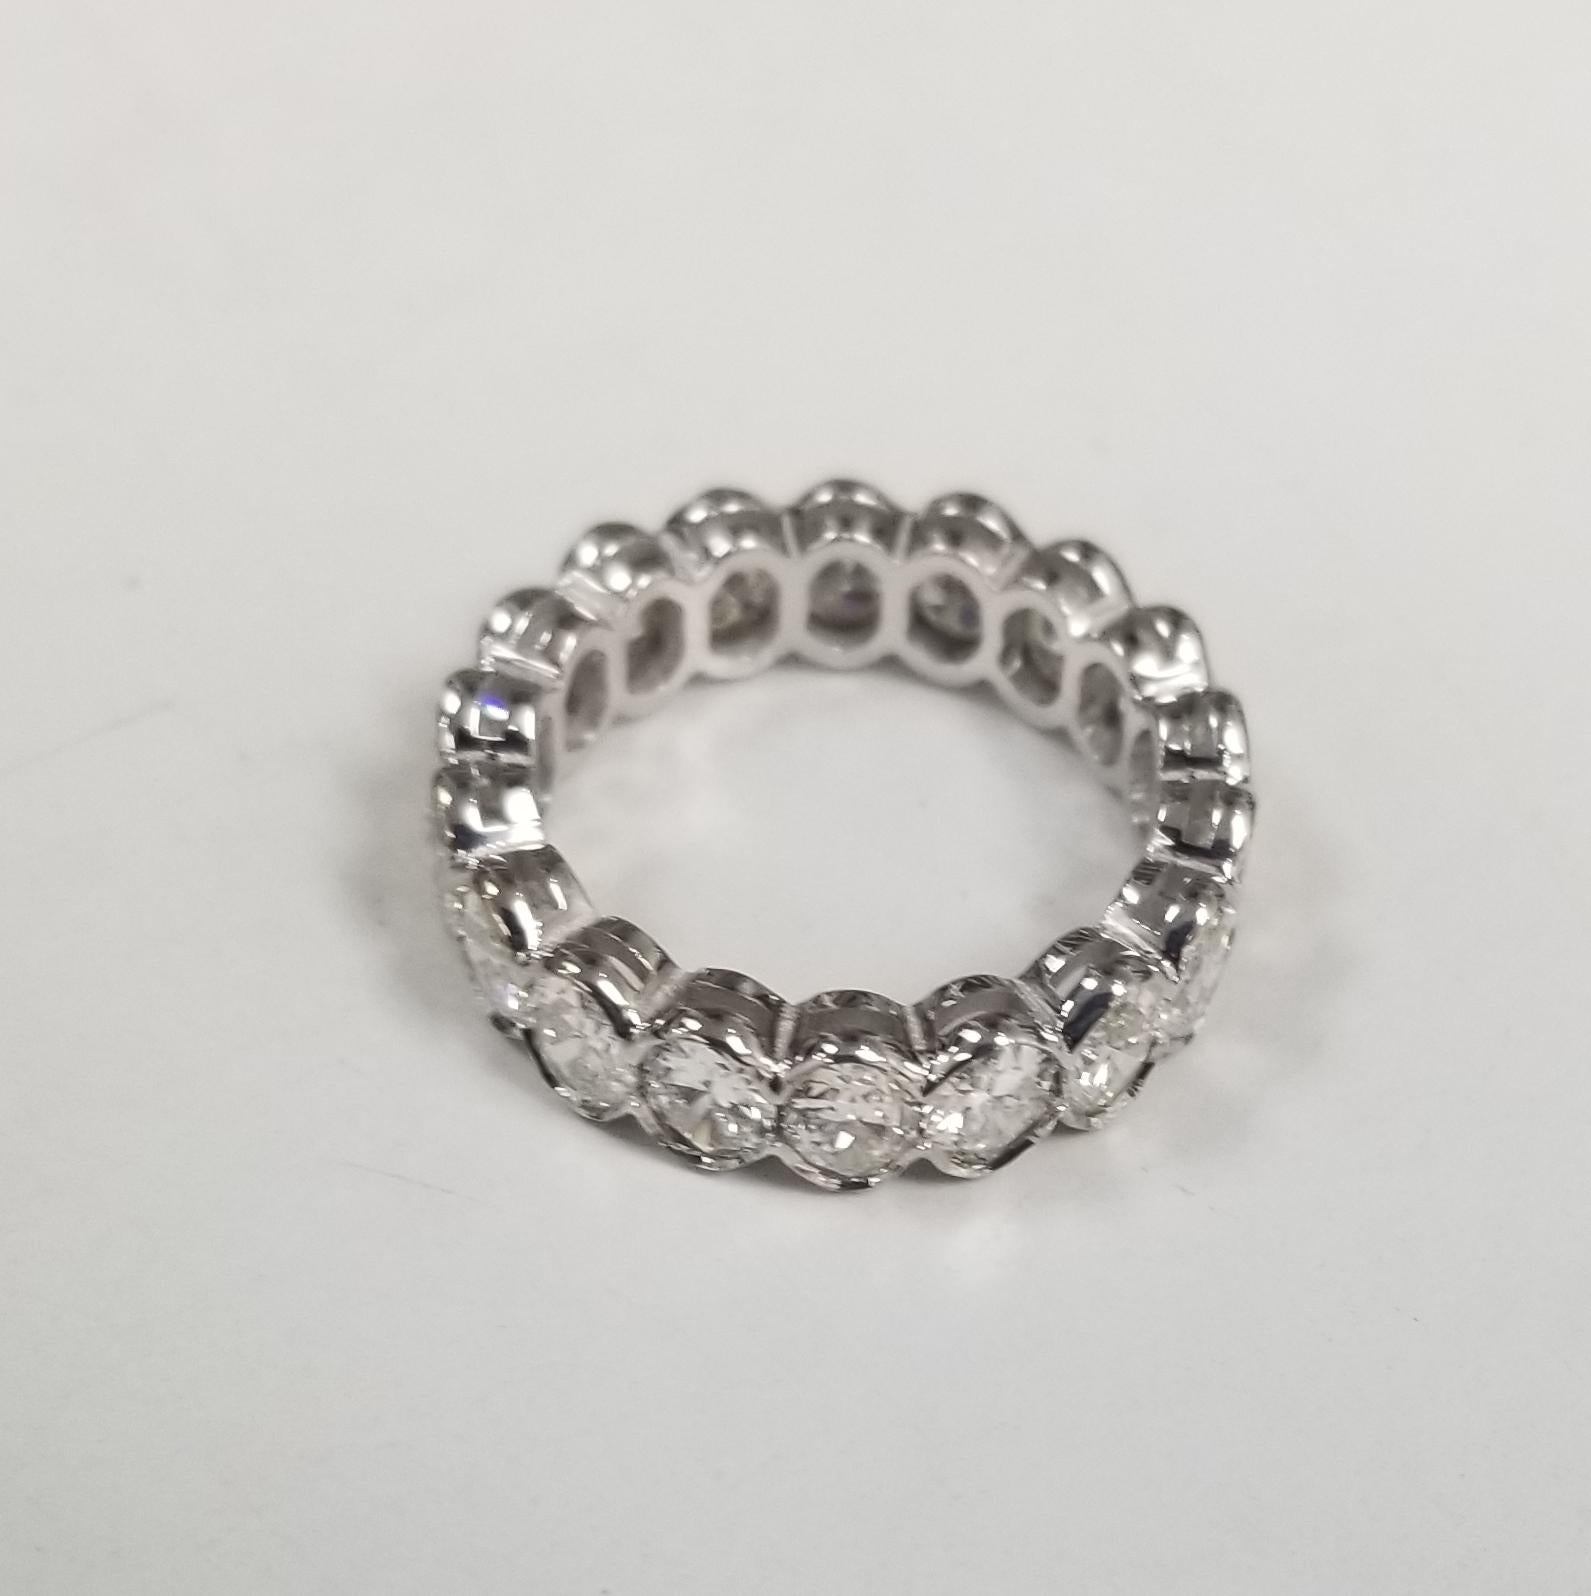 A breathtakingly beautiful diamond wedding band featuring 19 oval cut diamonds set in 14k white gold weighing 4.35carats. These spectacular diamonds are G in color, VS1-2  clarity. This seamless channel set eternity band is expertly crafted surely